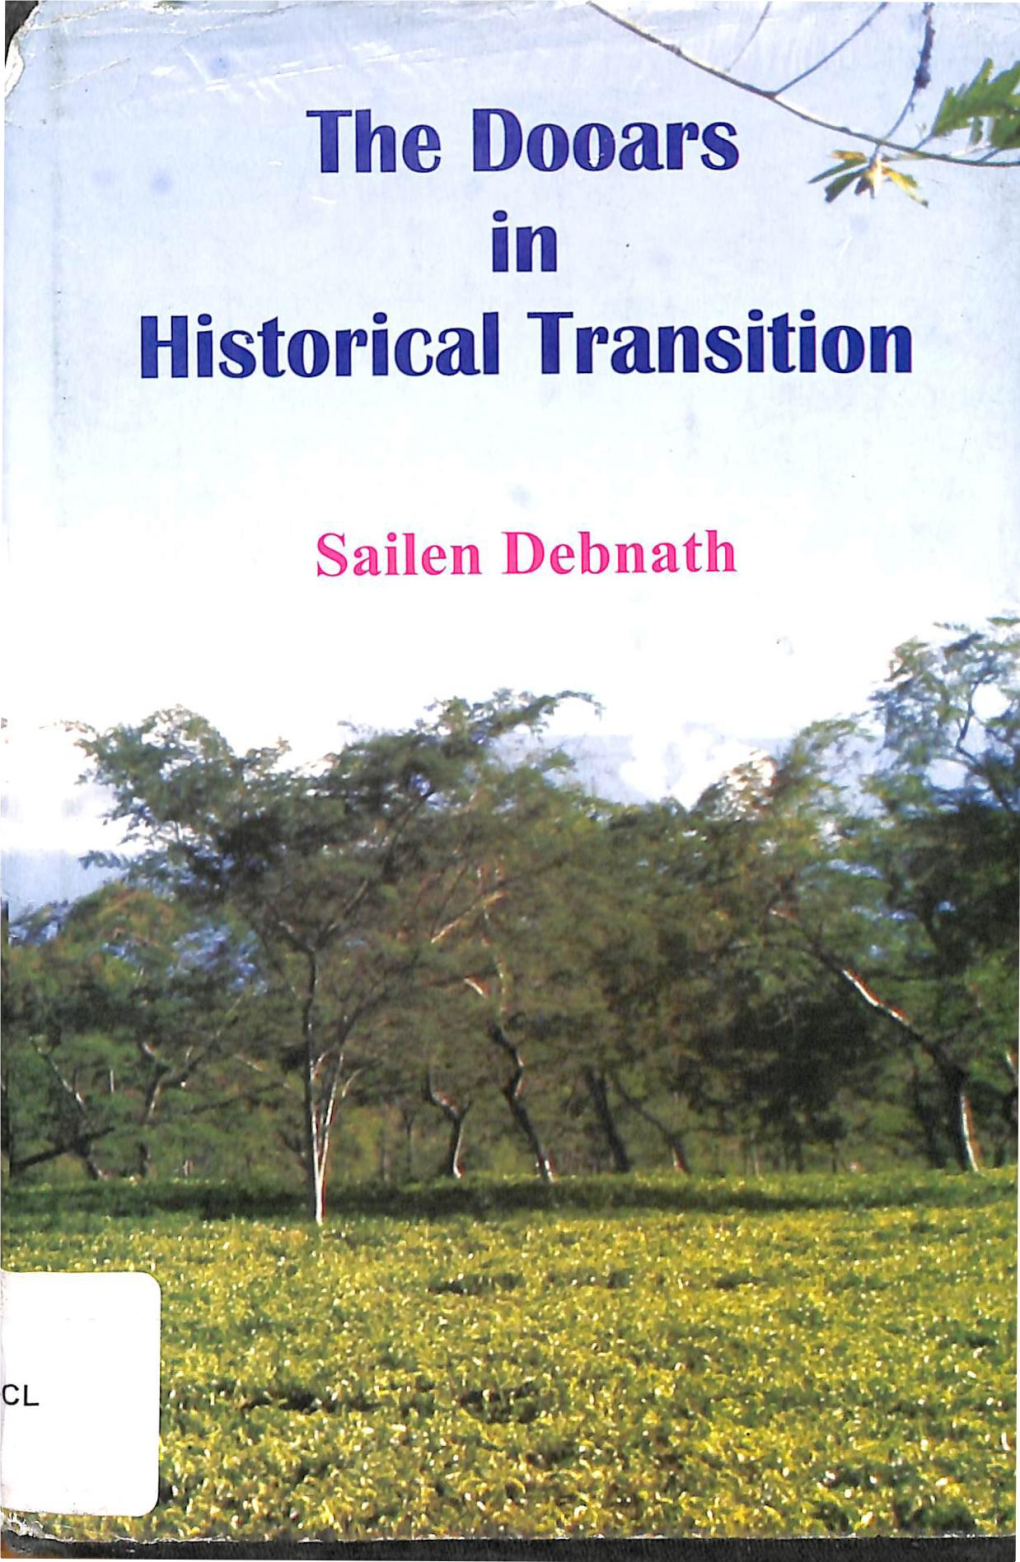 THE DOORA in HISTORICAL TRANSITION 0.Pdf